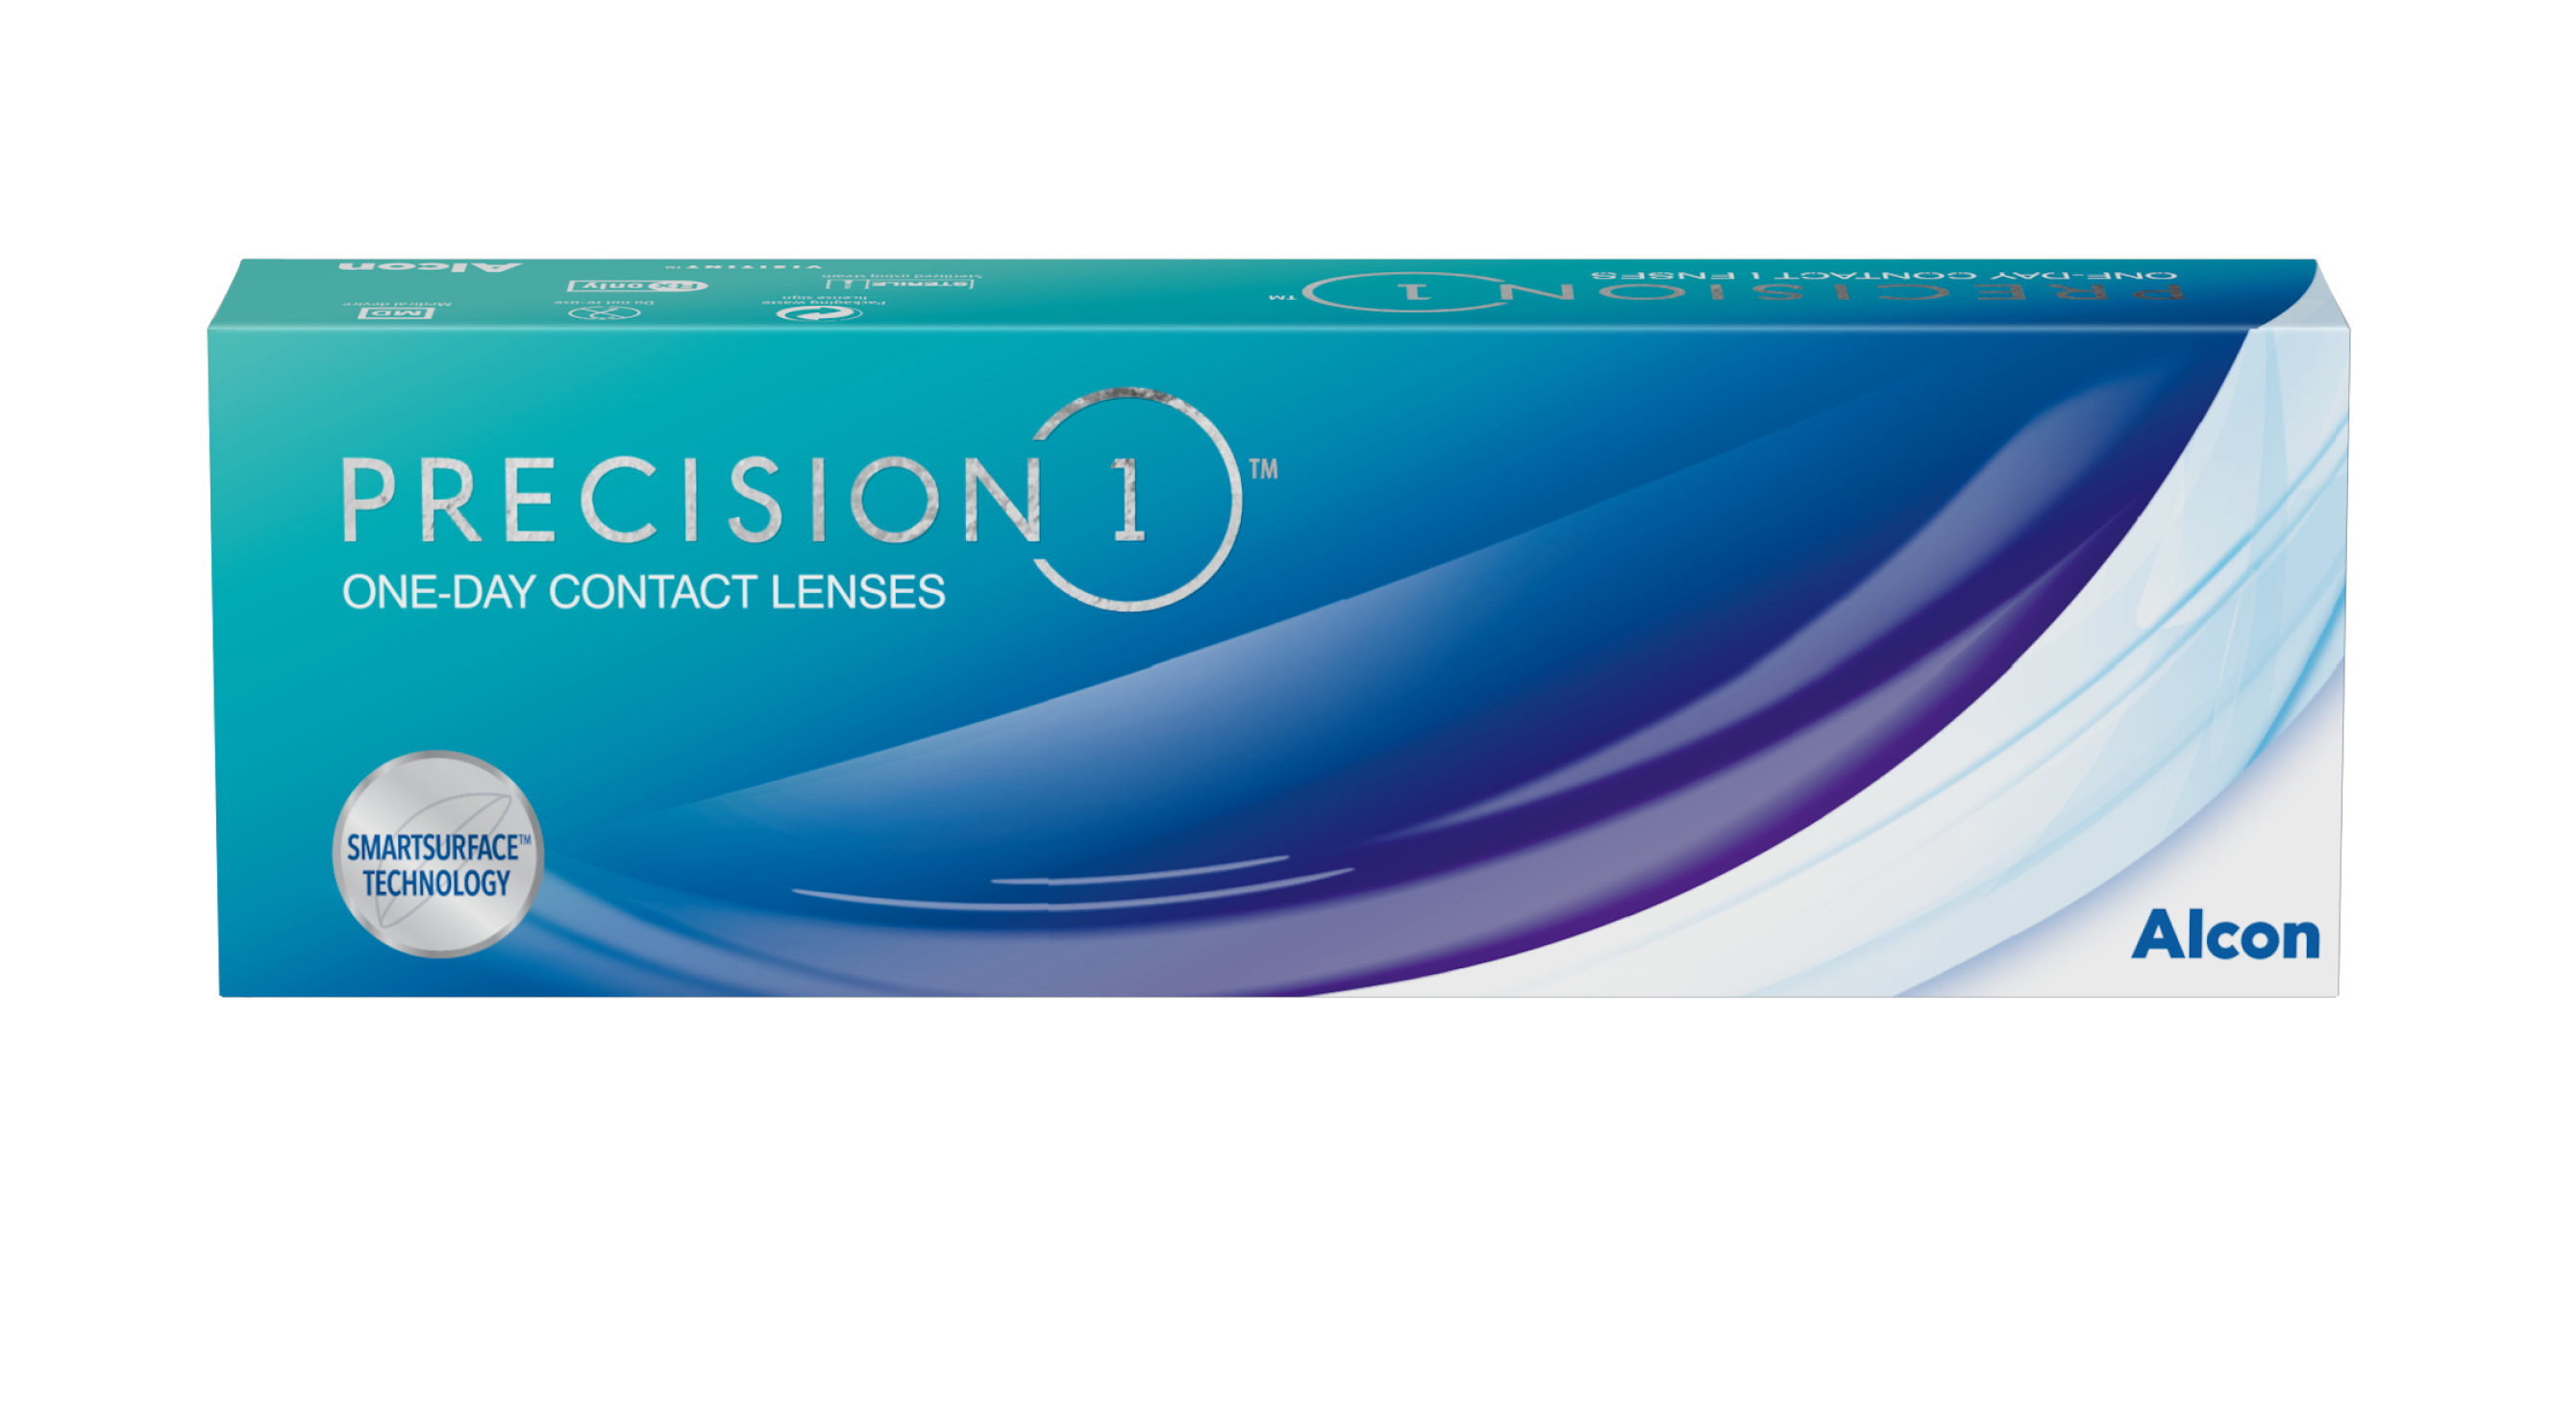 PRECISION1 Contact lens pack